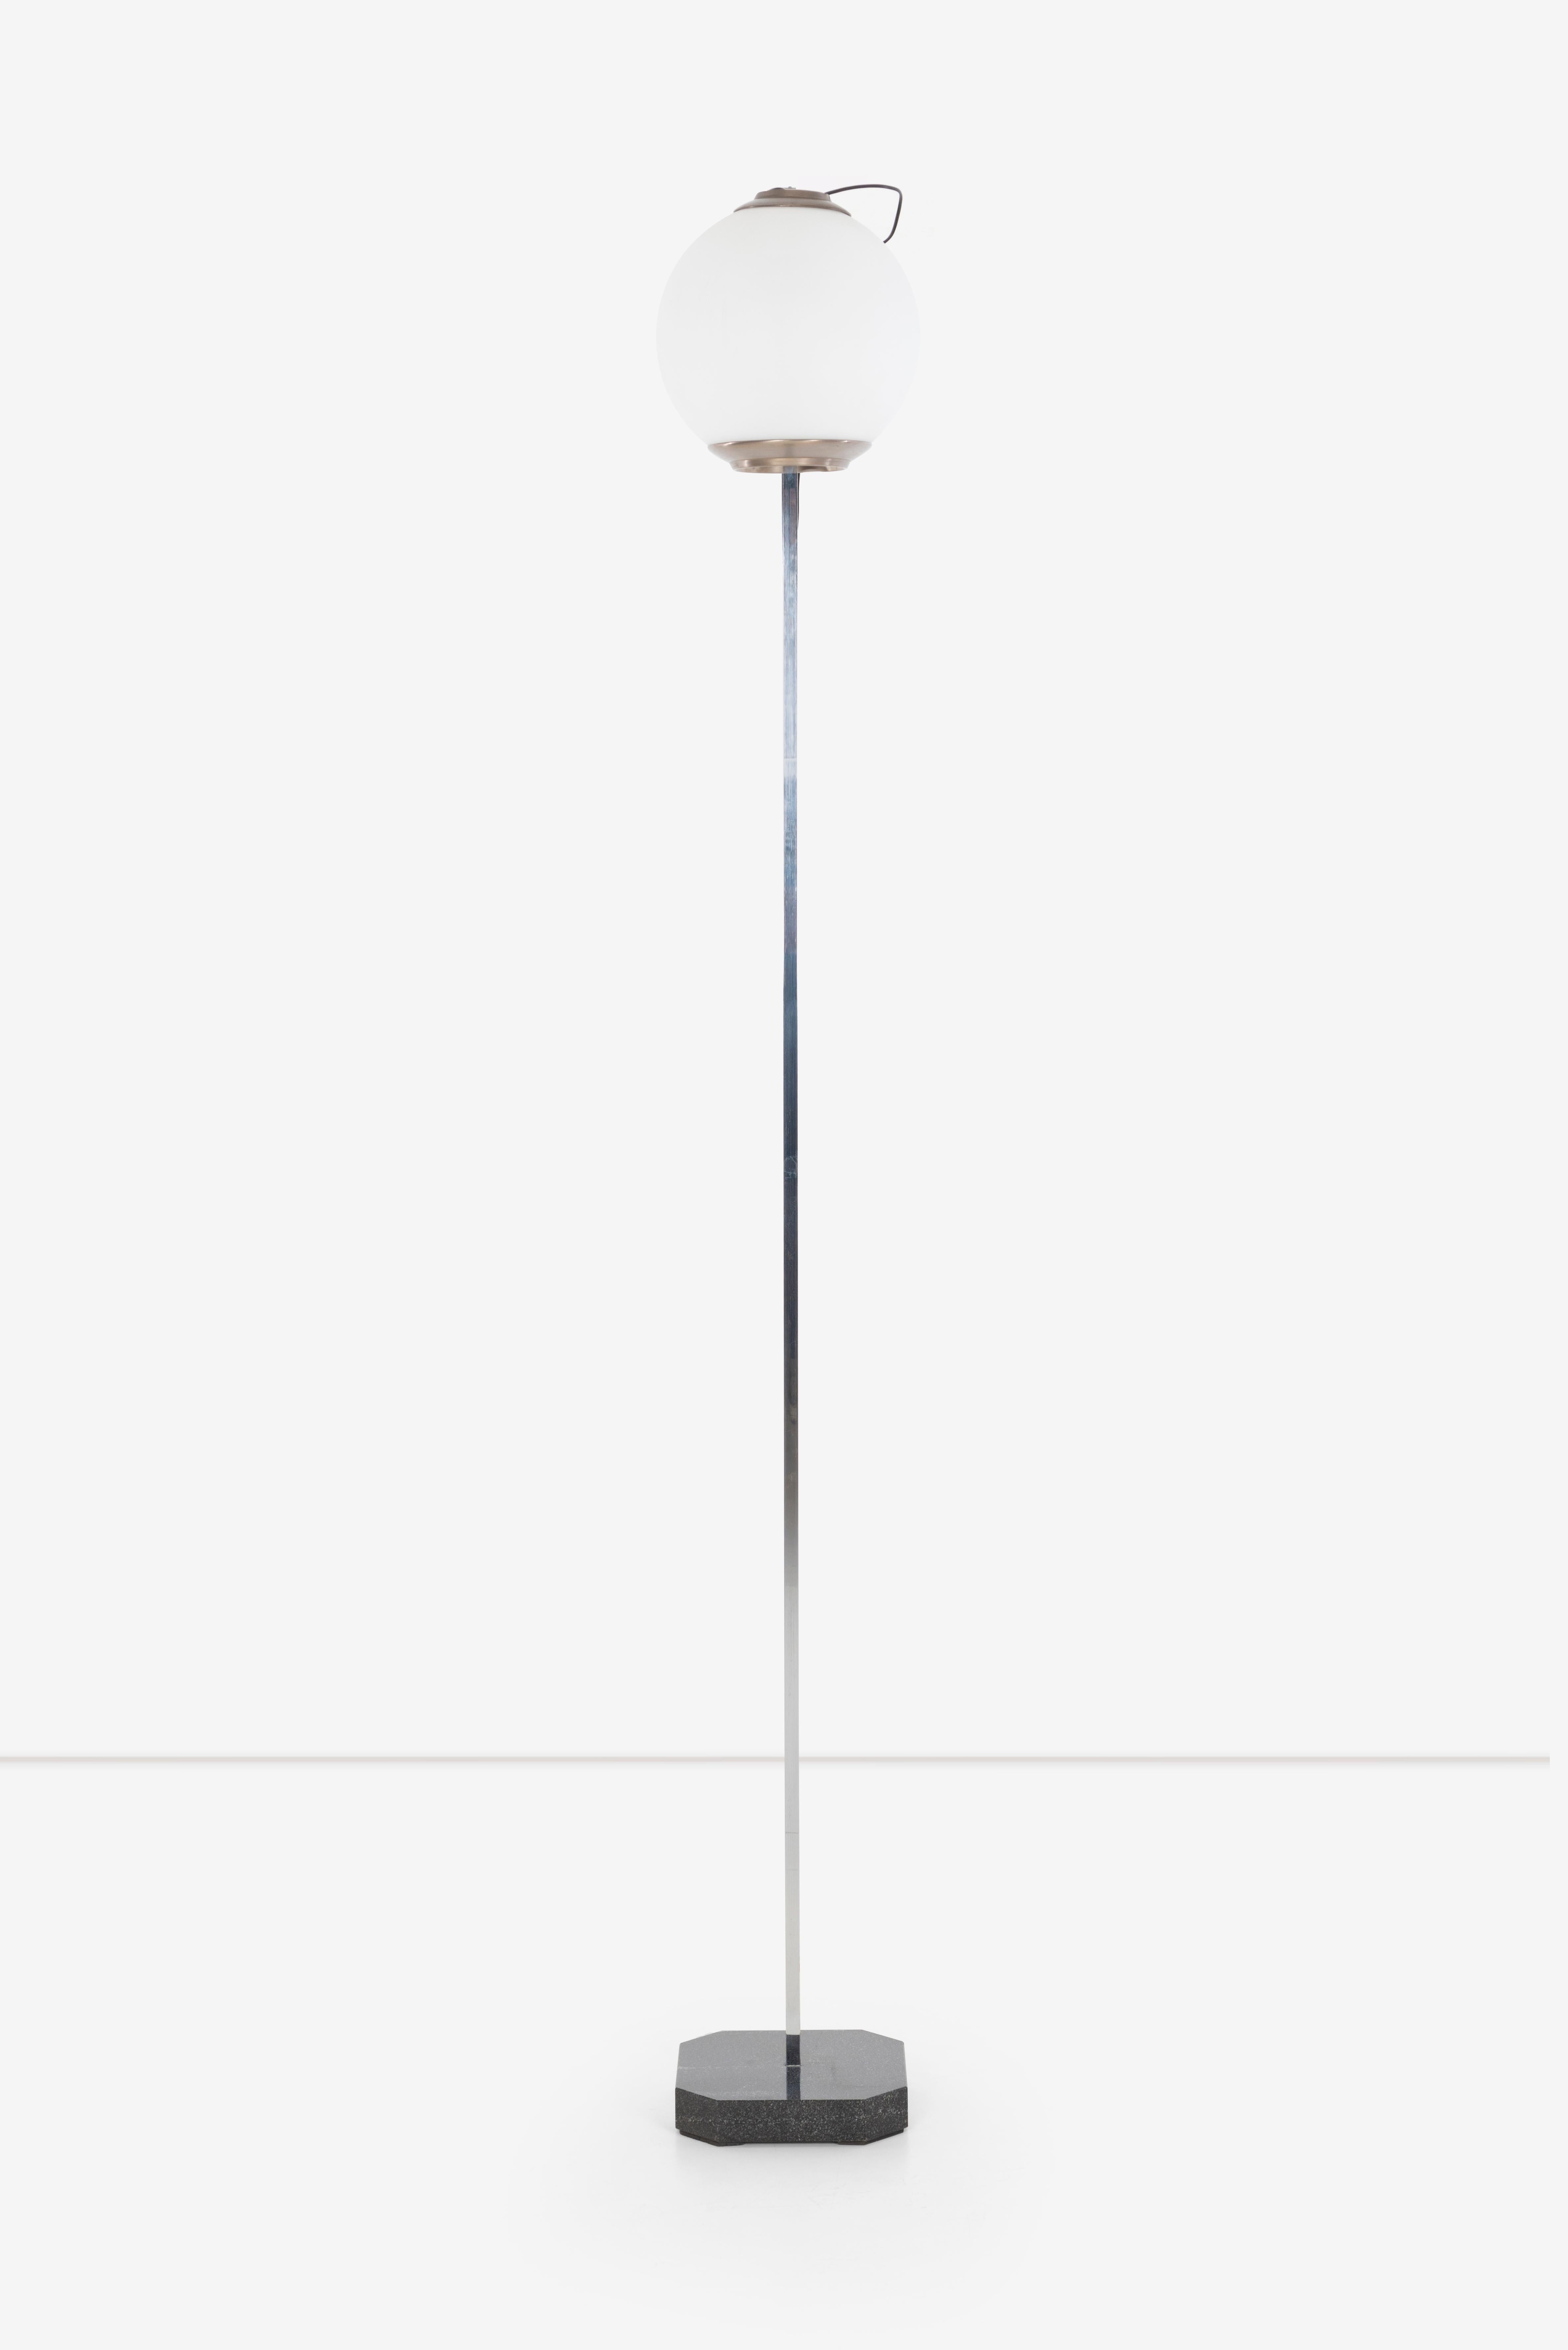 Luigi Caccia Dominioni
Lte 10 floor lamp, Black granite base with chrome-plated brass stem and frosted glass shade.